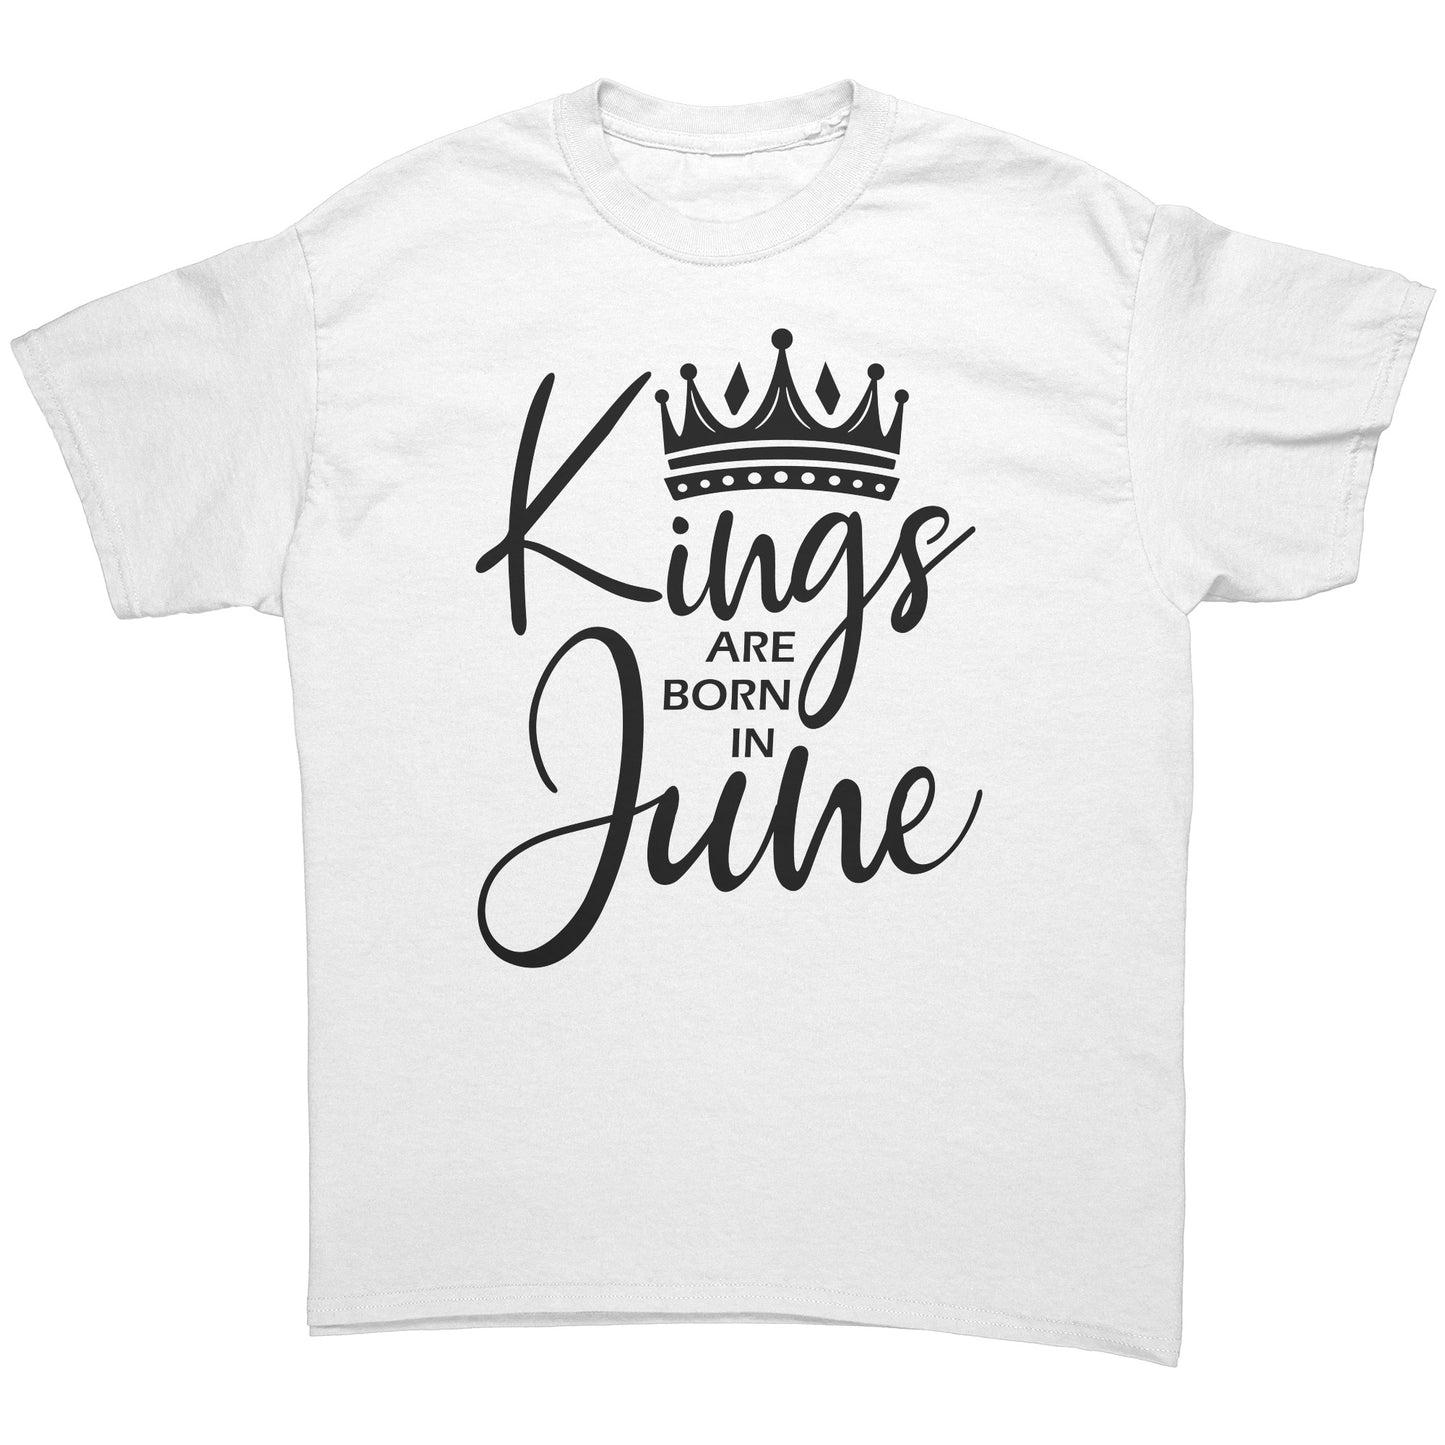 Kings Are Born In June Tee